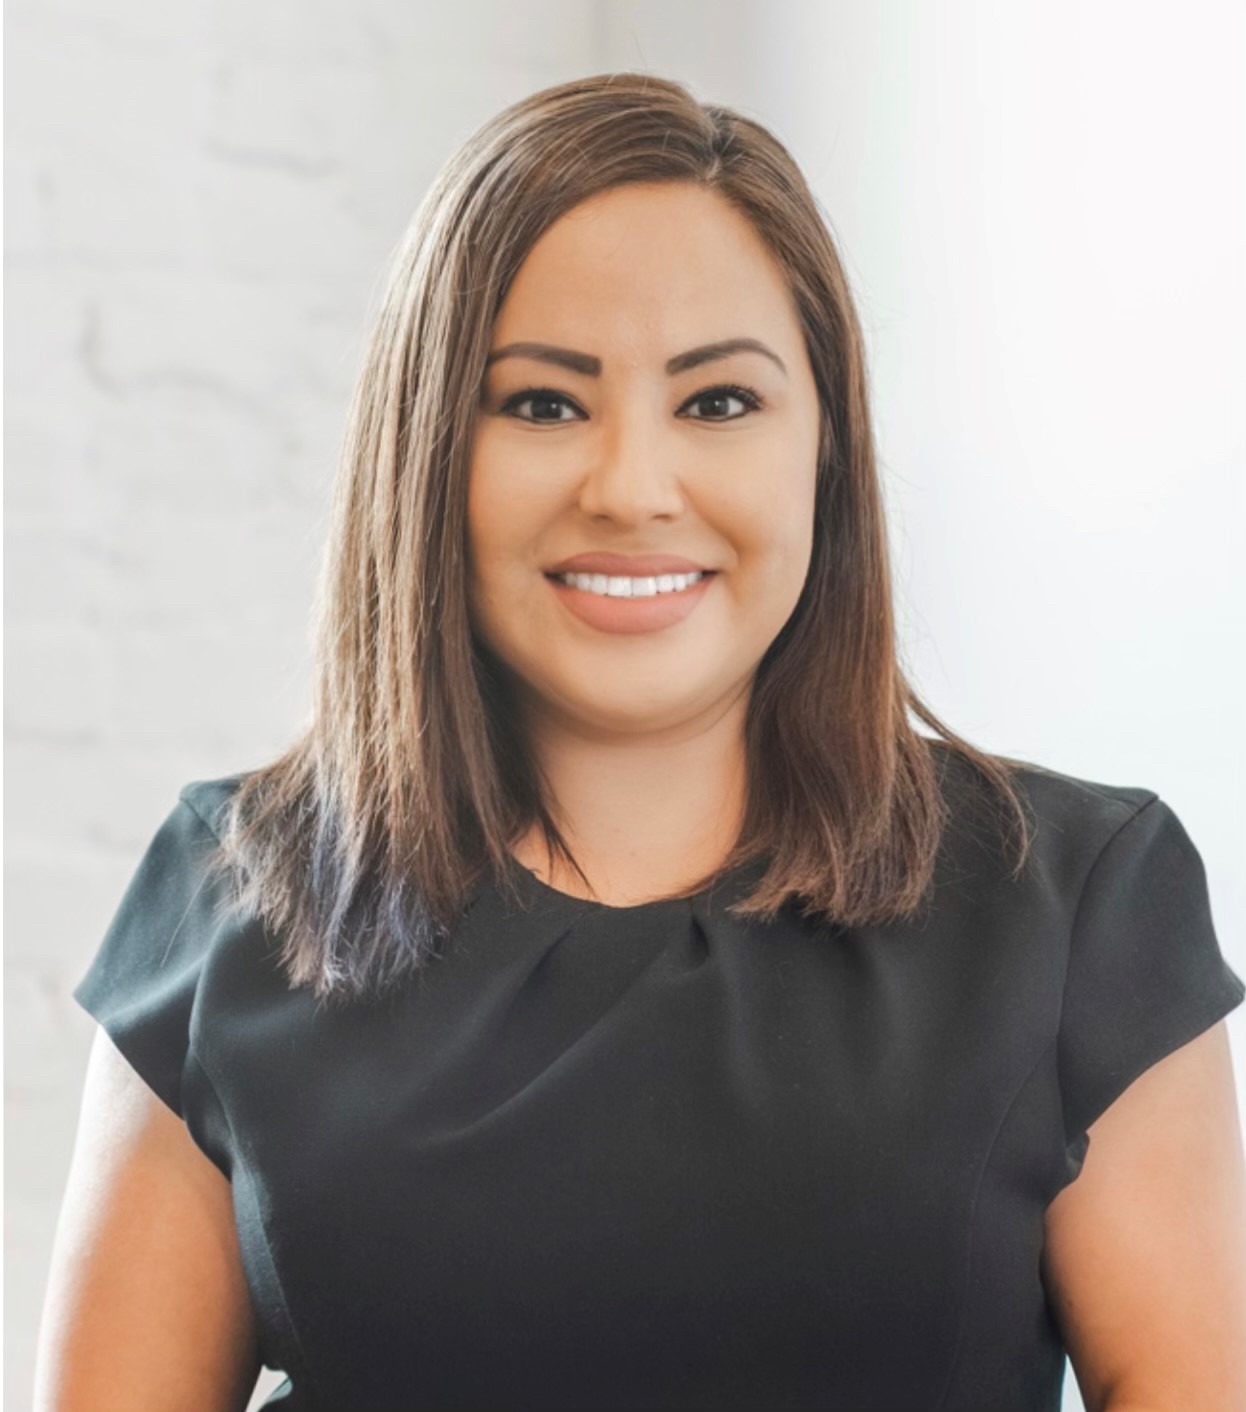 Melissa Rodriguez - Agent at The Reyna Group